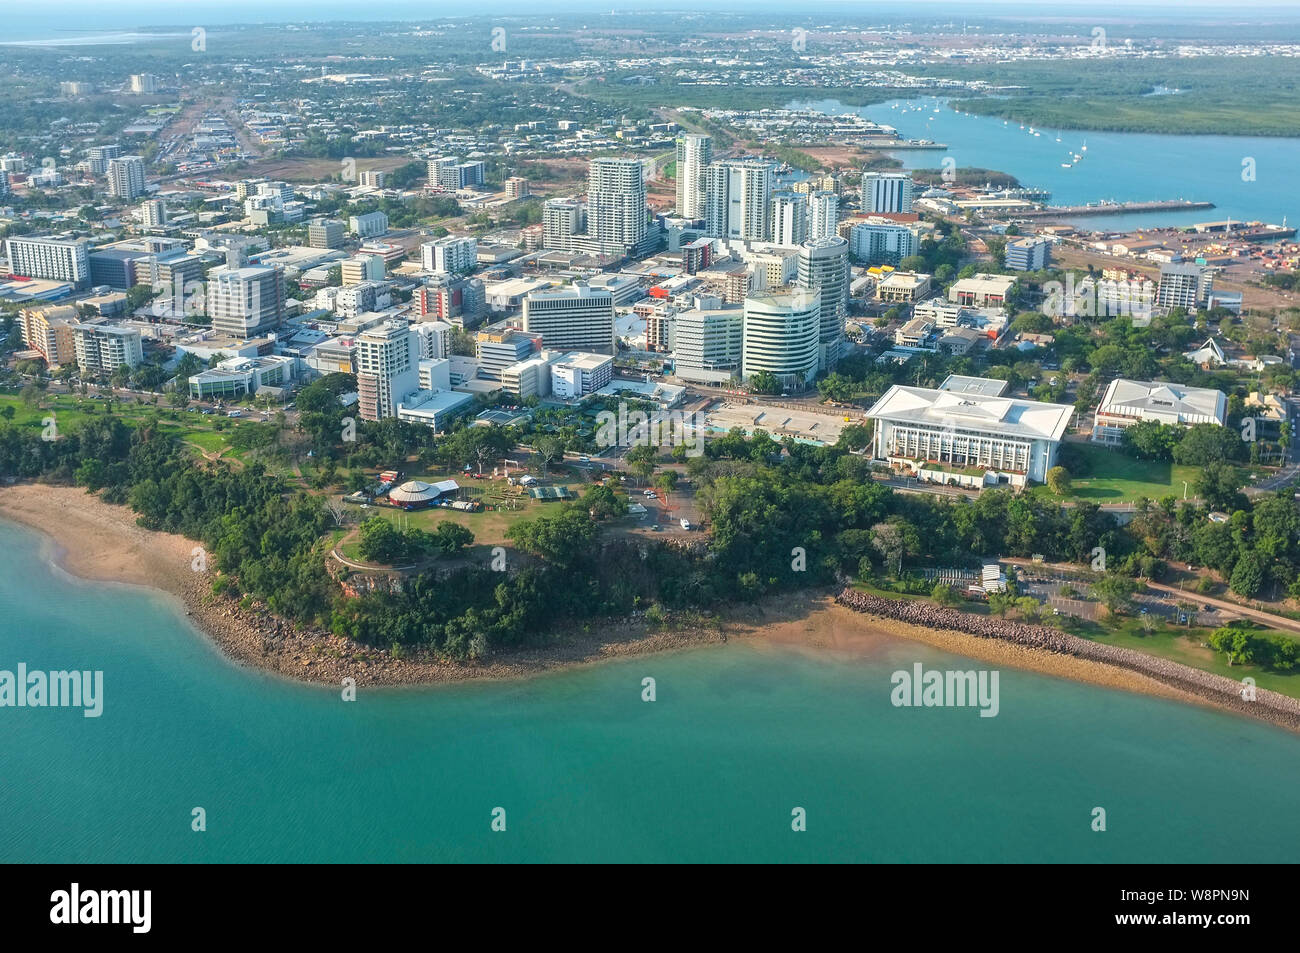 The city of Darwin capital city of the Northern Territory of Australia, view from the air. Stock Photo